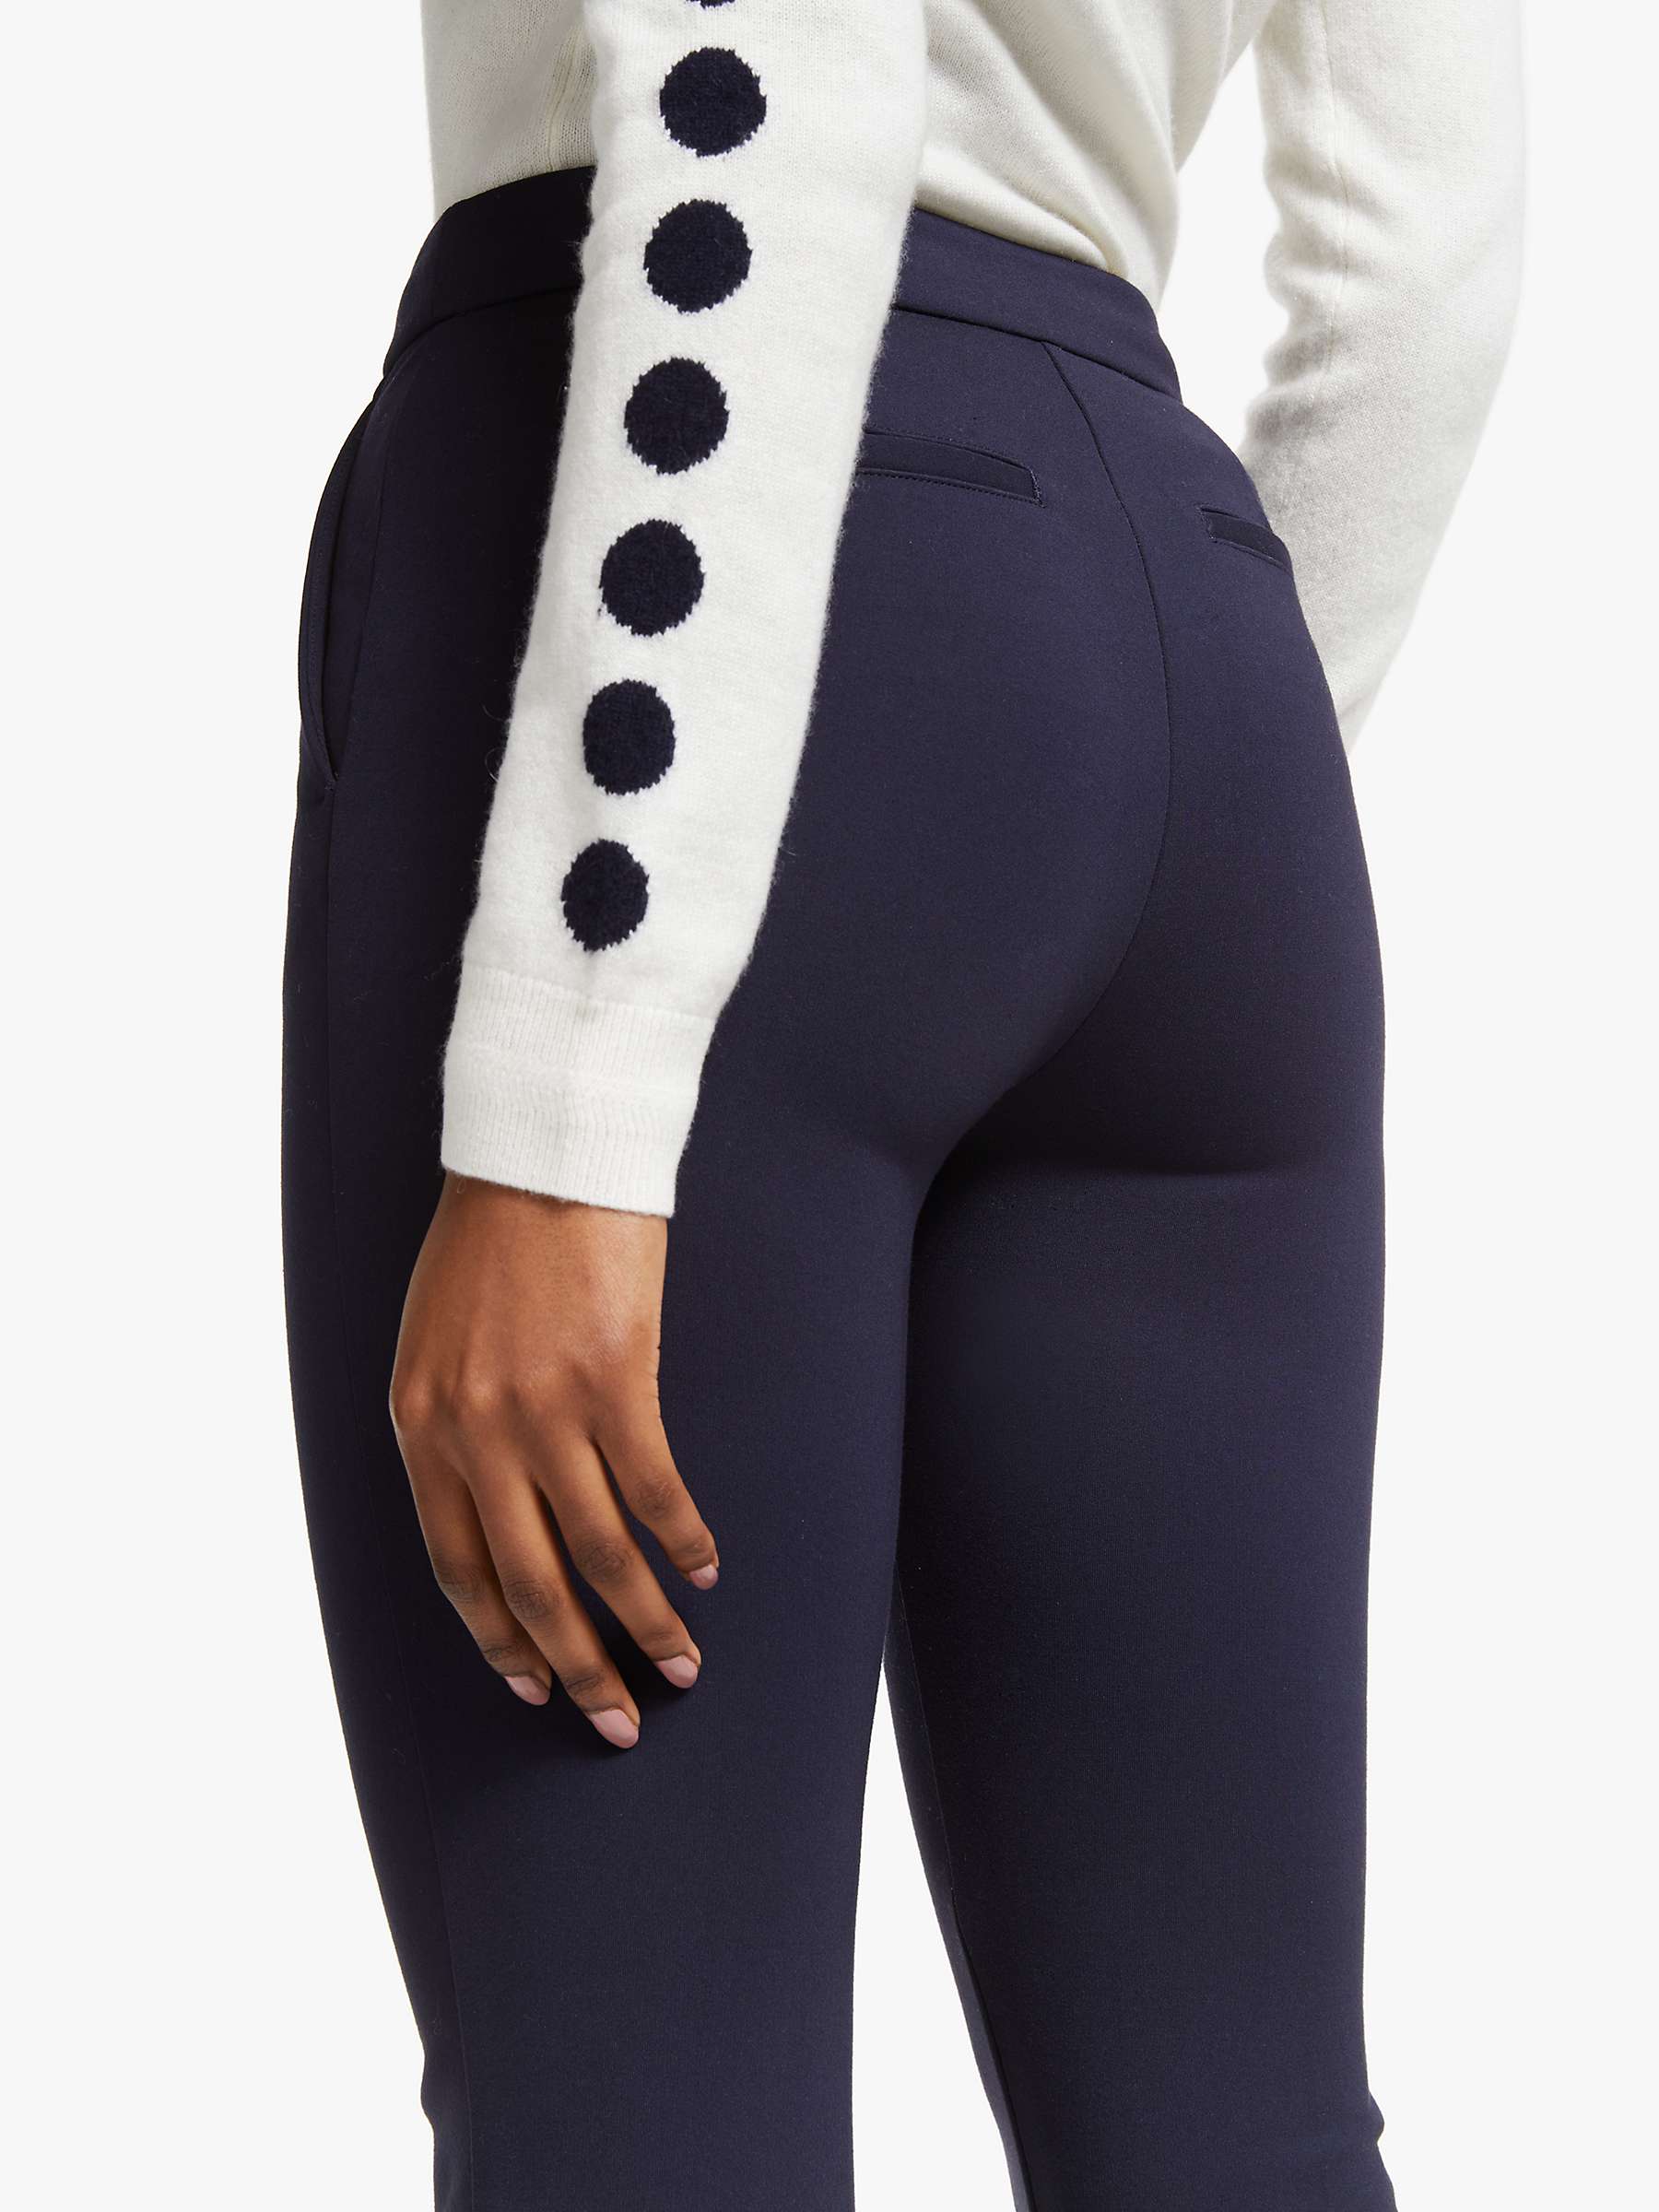 Buy Boden Hampshire 7/8 Trousers Online at johnlewis.com